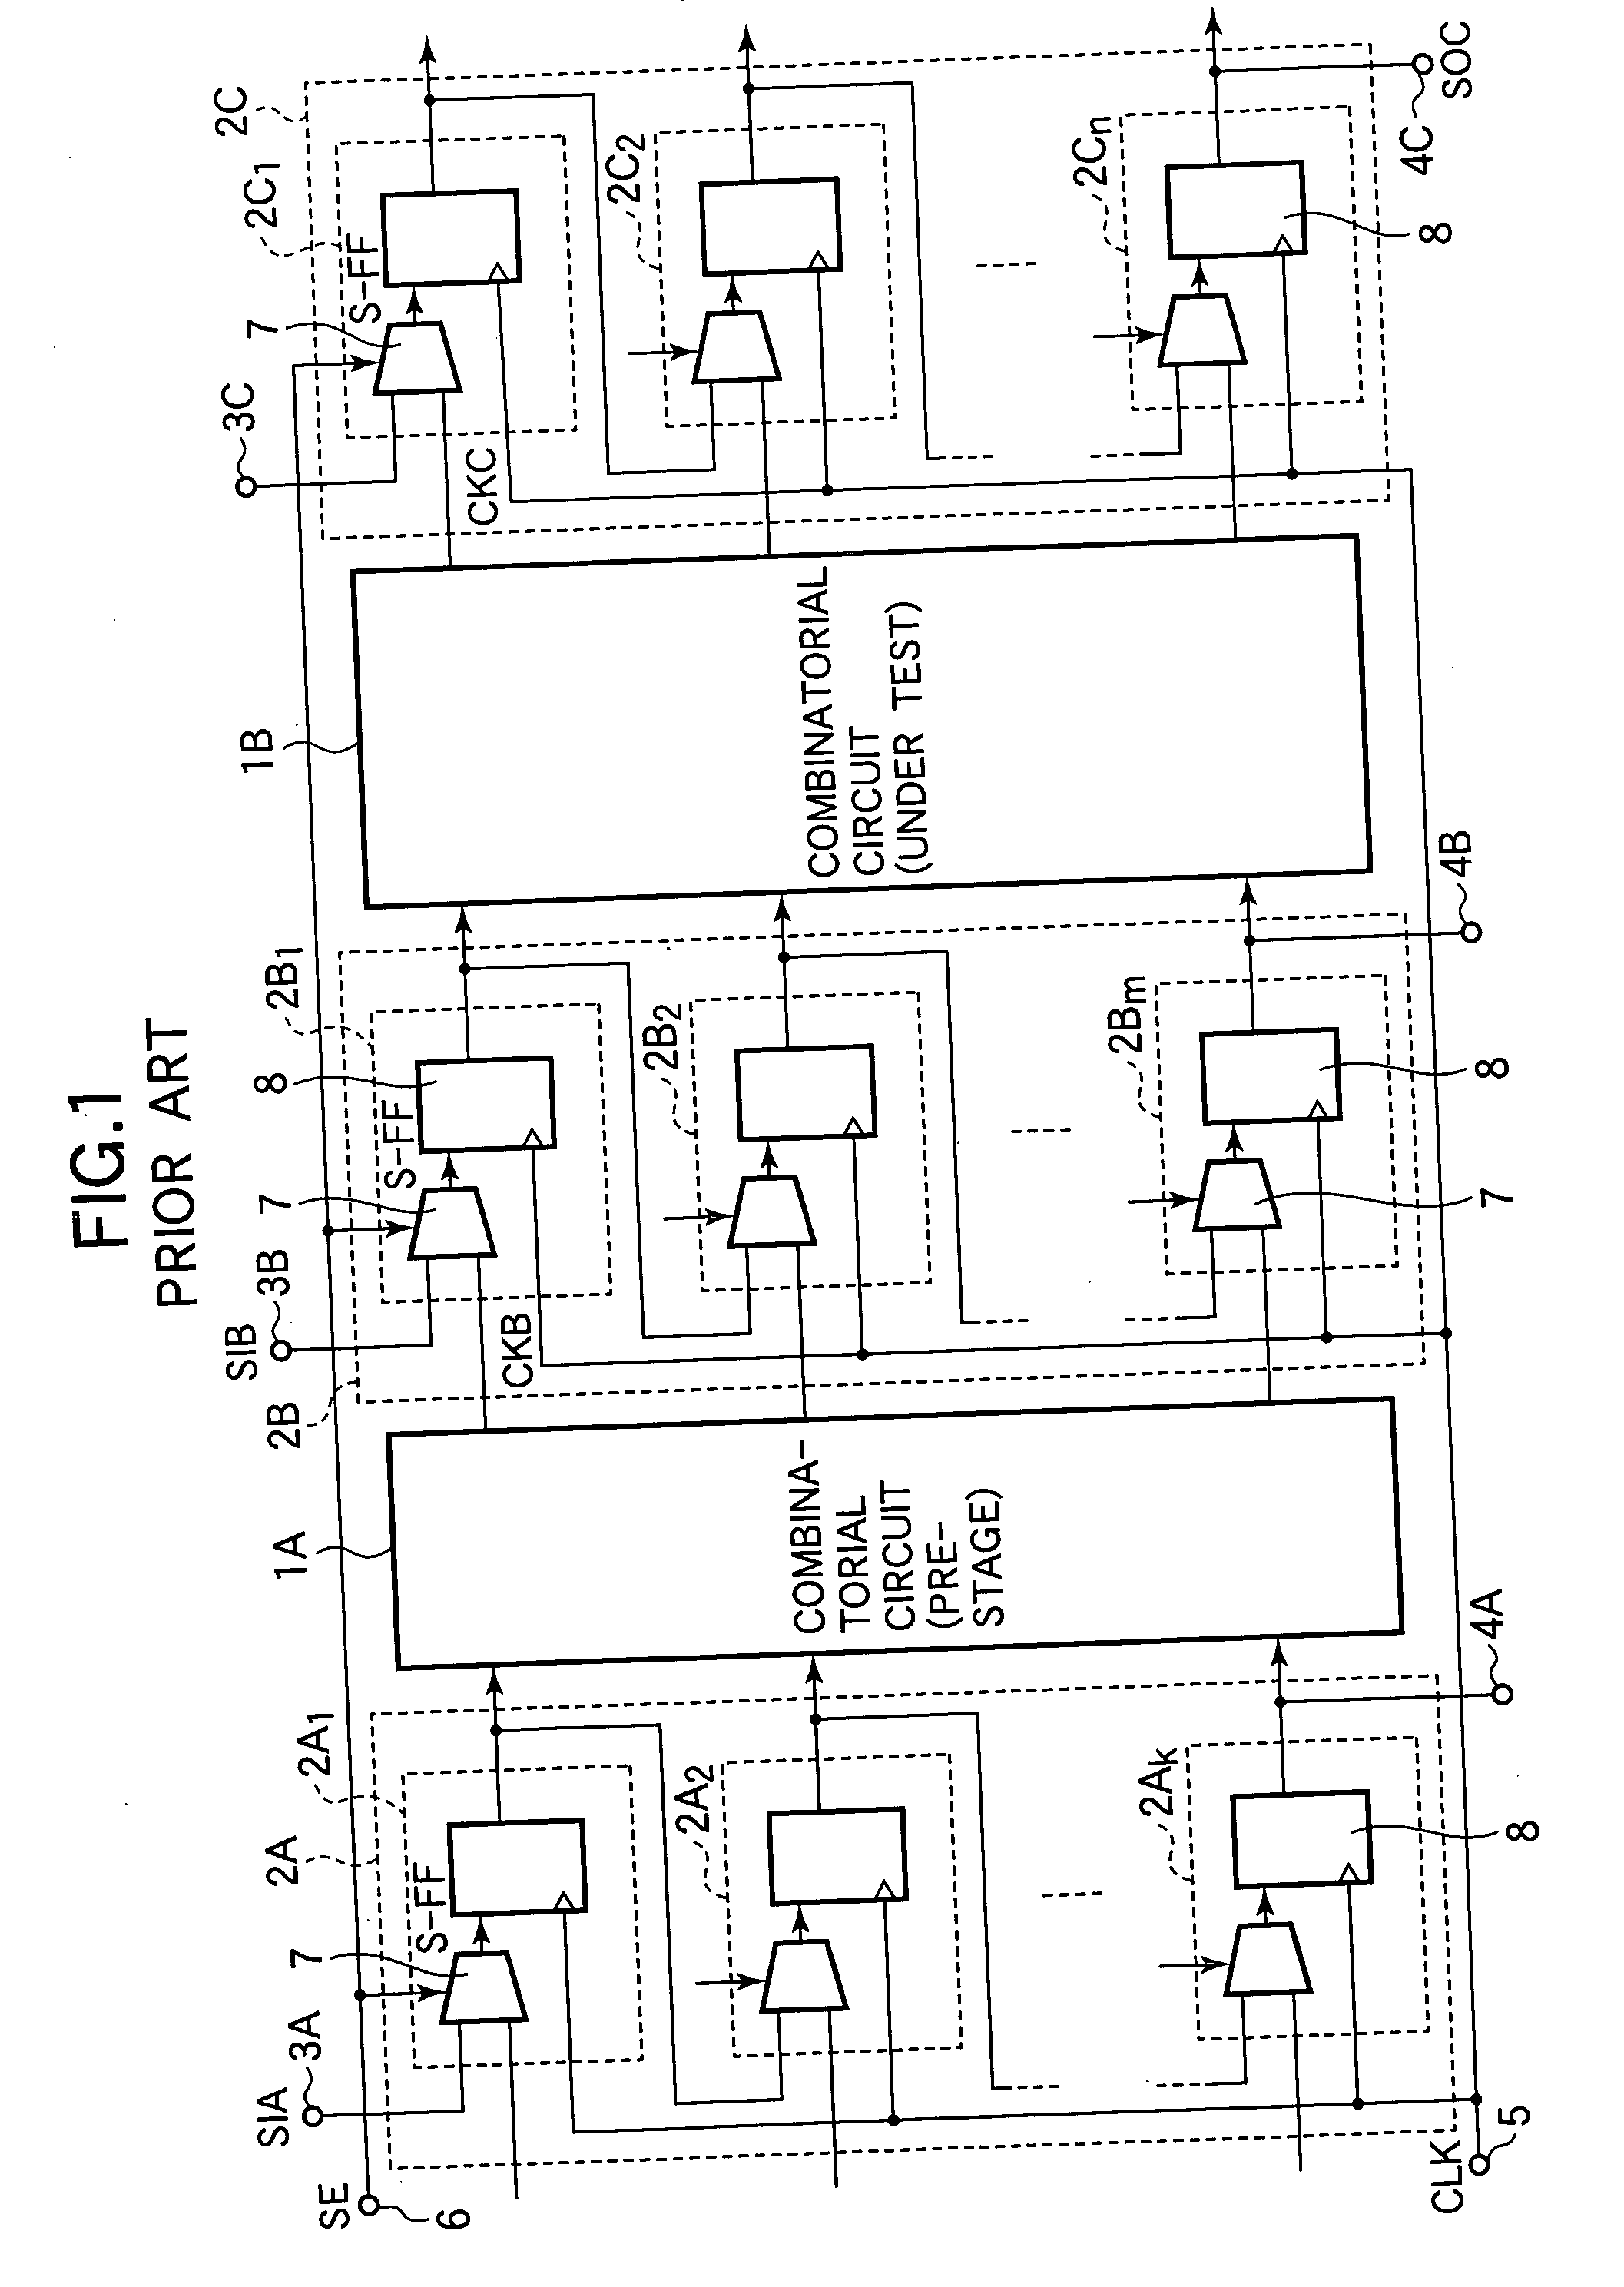 Delay test method for large-scale integrated circuits